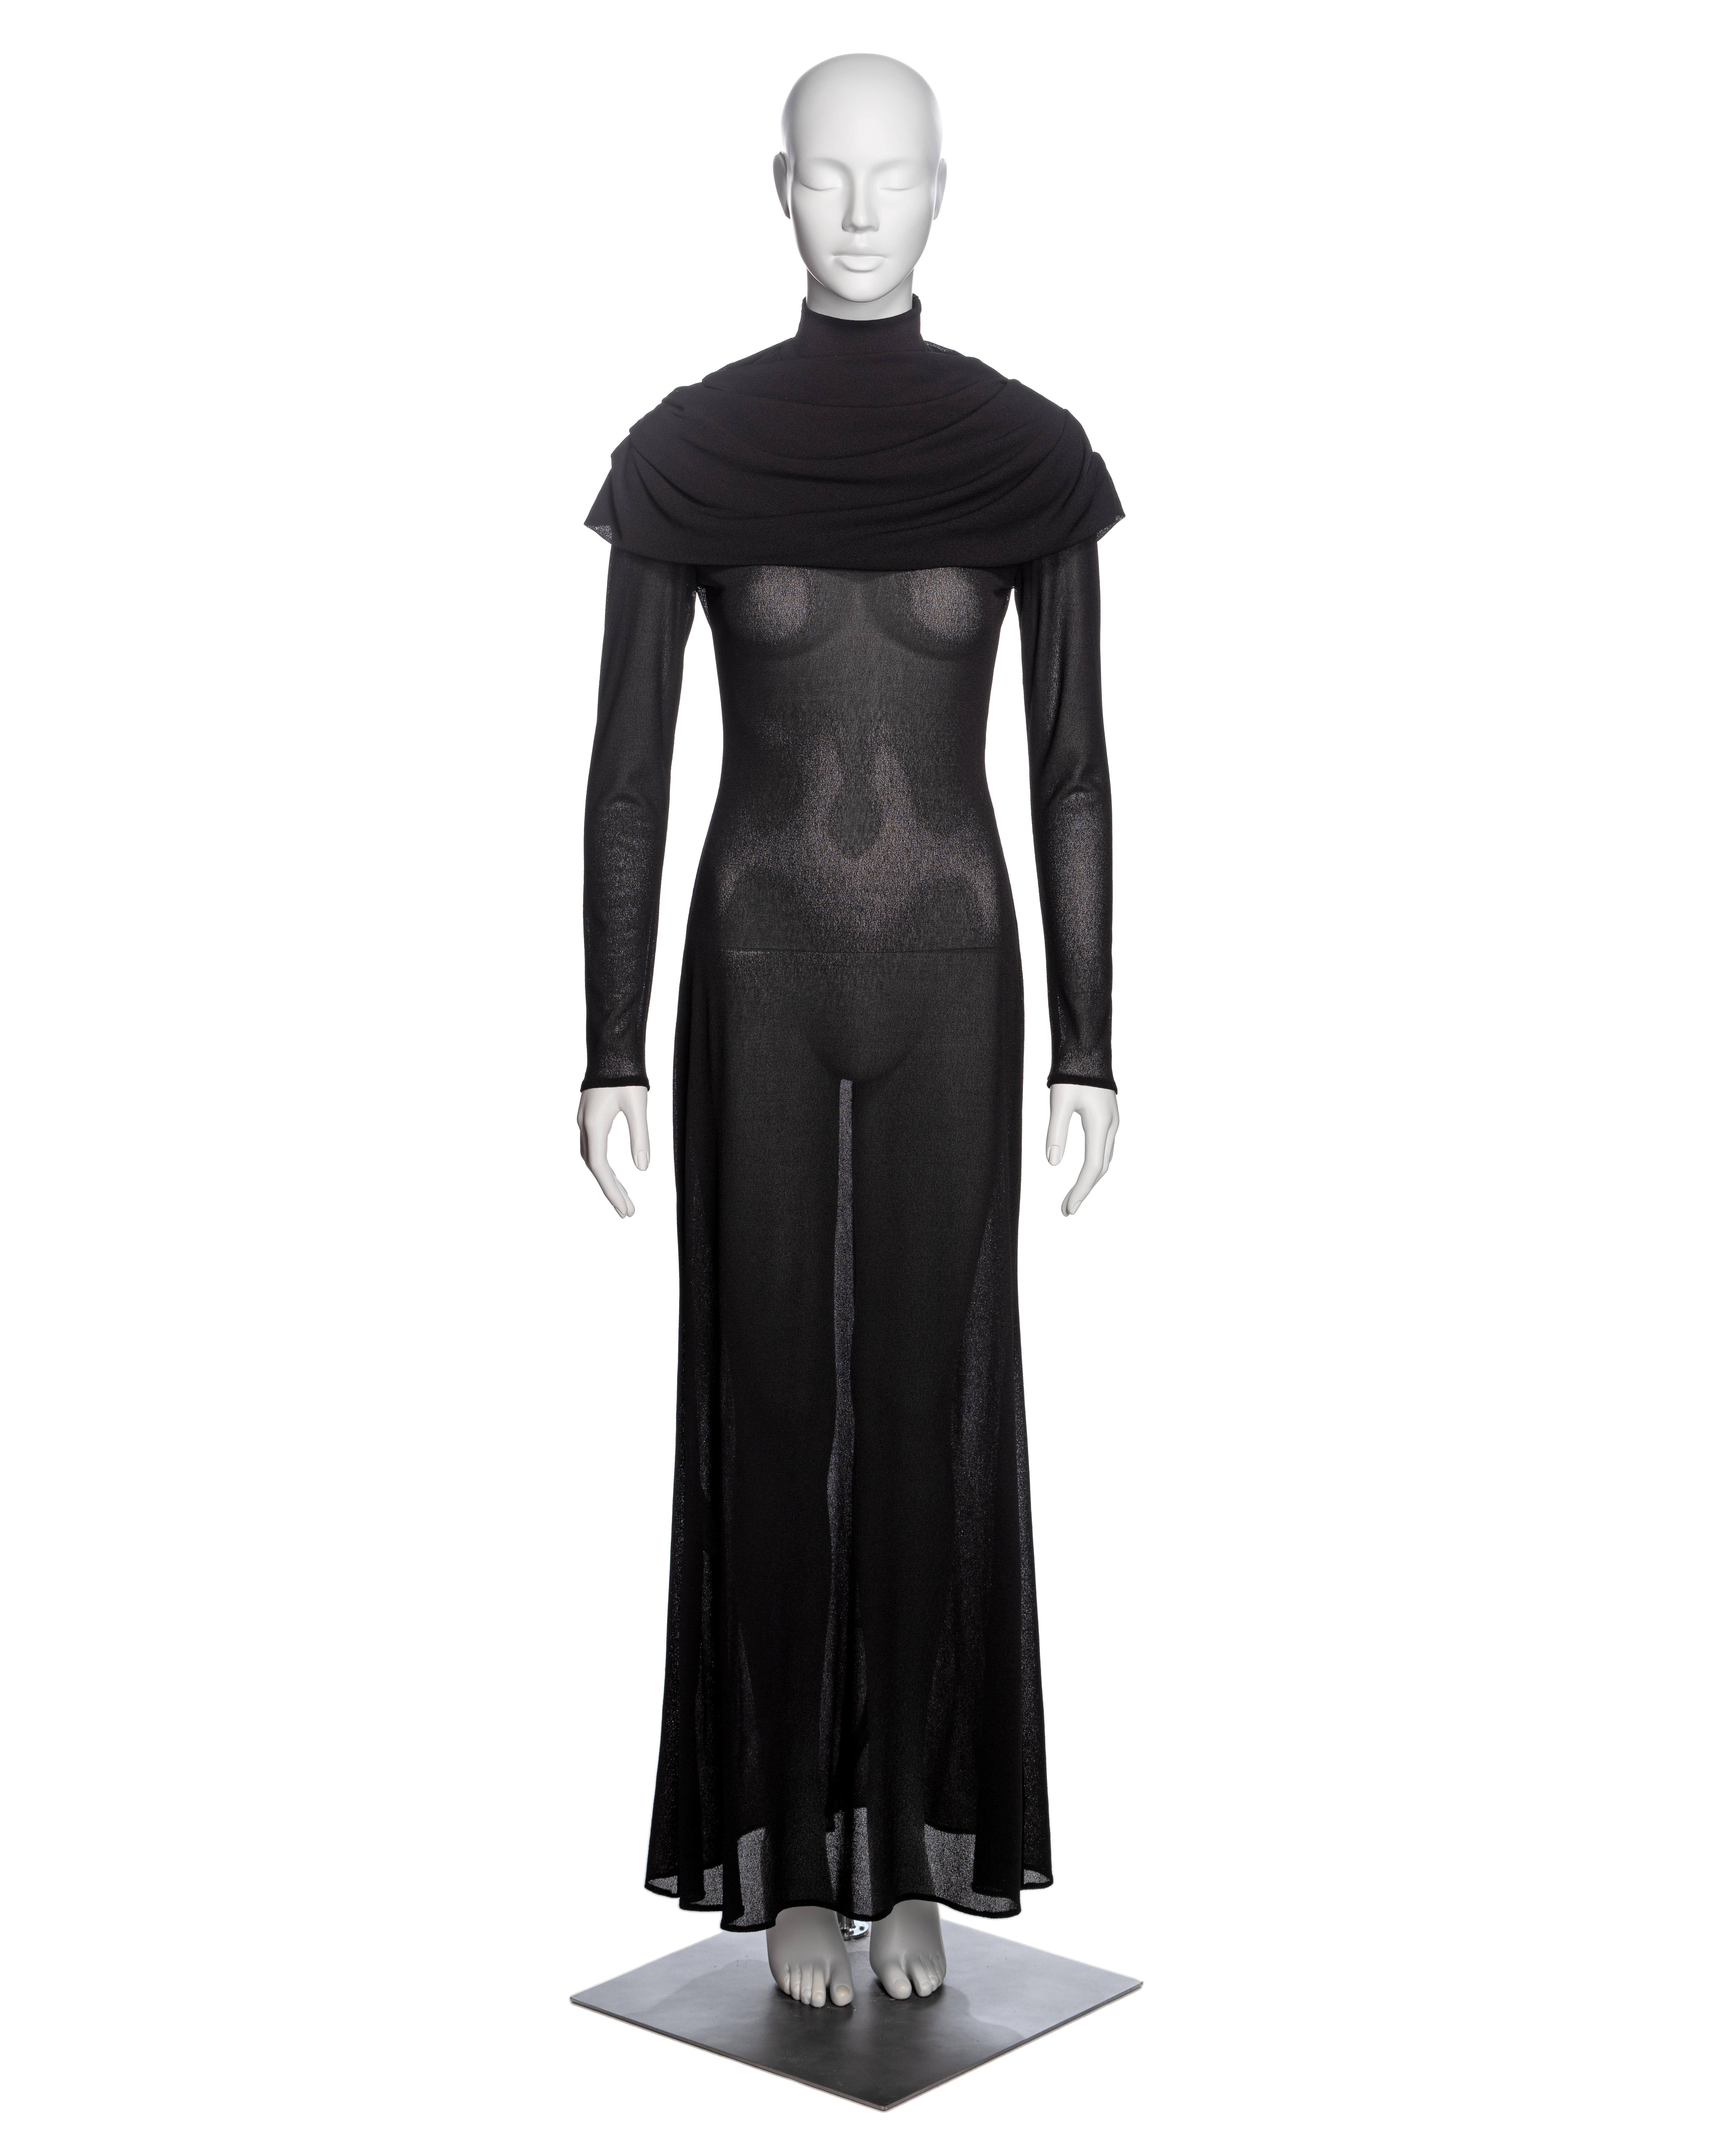 ▪ Brand: Alexander McQueen
▪ Creative Director: Lee Alexander McQueen
▪ Collection: Fall-Winter 1998
▪ Fabric: Black polyester crepe
▪ Details: Mock neck with a built-in draped cowl, long fitted sleeves with mother-of-pearl buttons, A-line maxi